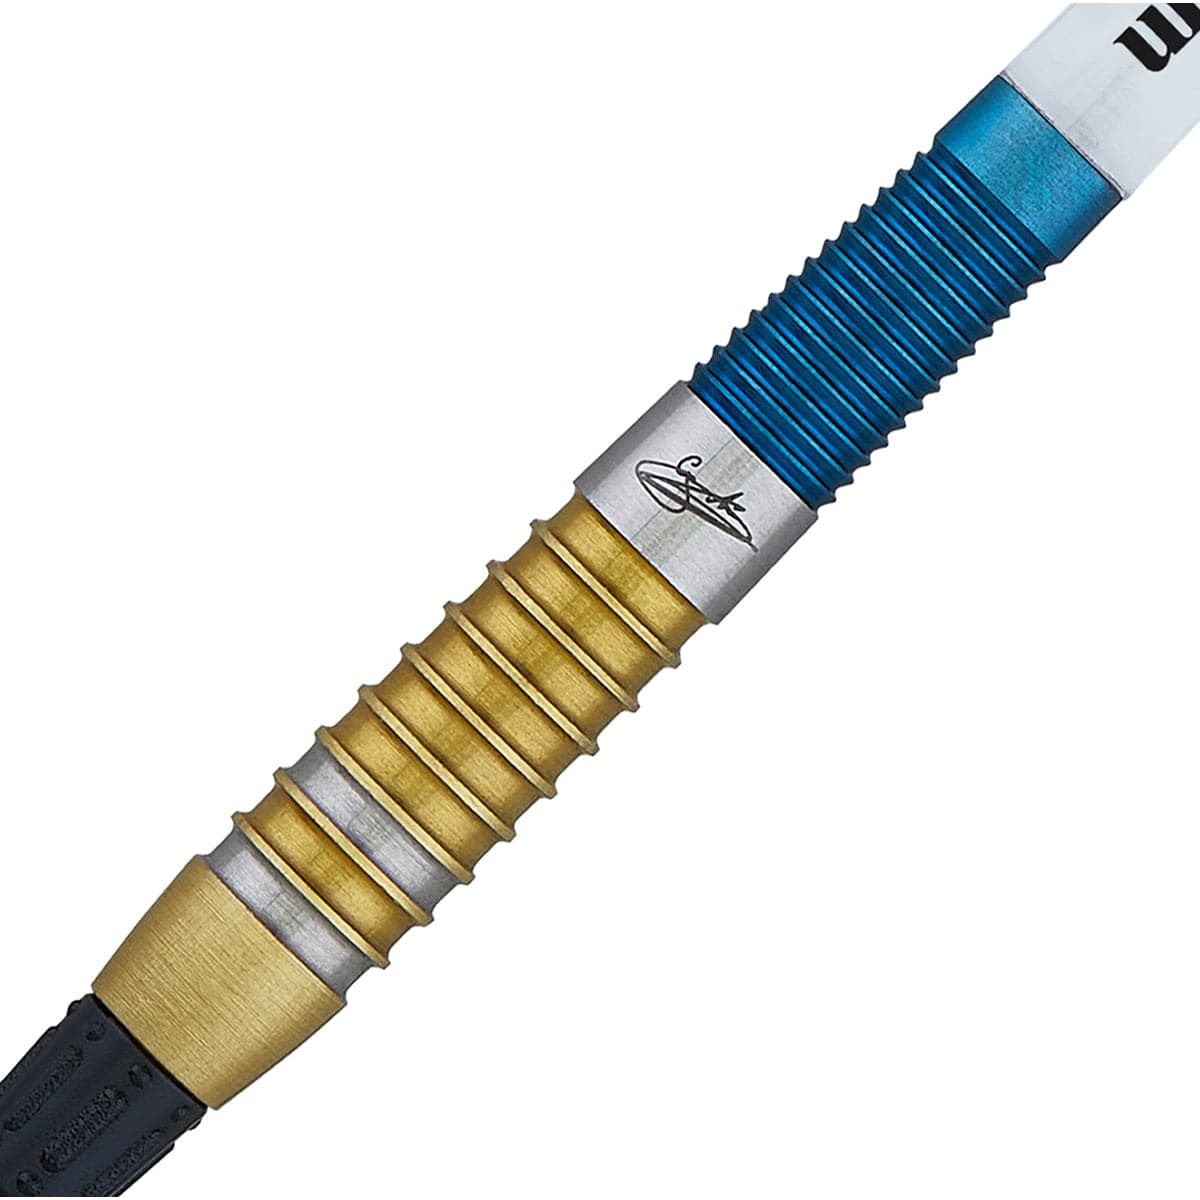 Unicorn Gary Anderson Darts - Soft Tip - The Flying Scotsman - Duo - Blue & Gold